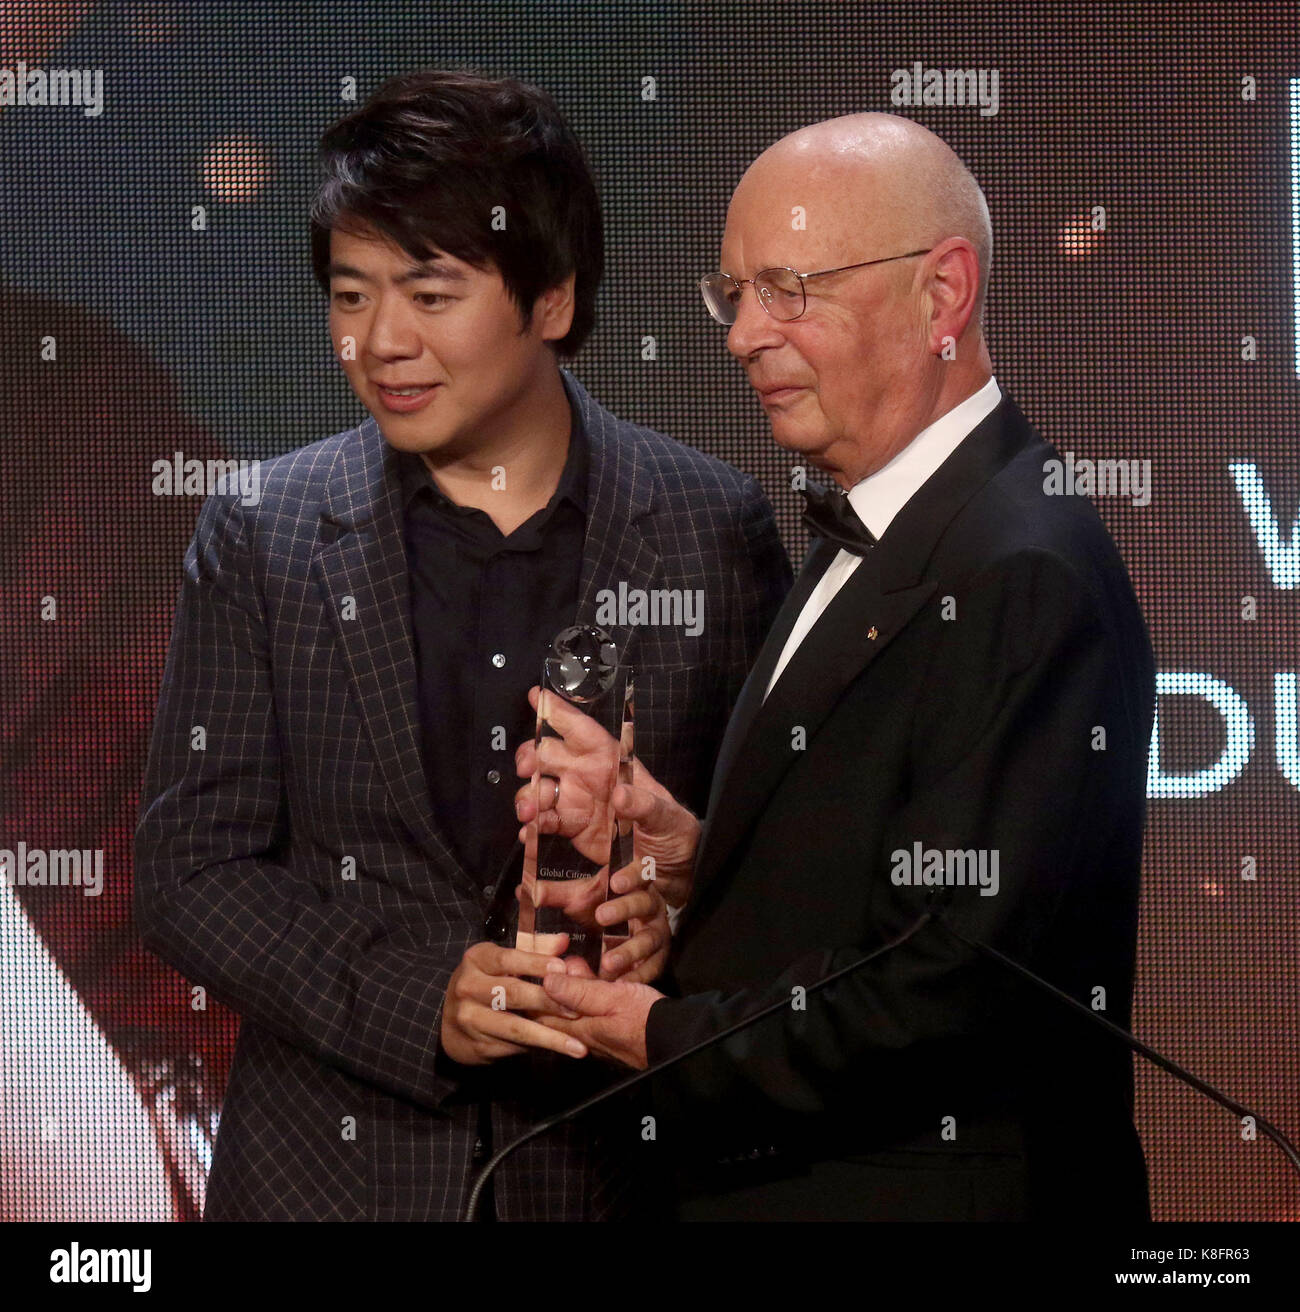 New York, New York, USA. 19th Sep, 2017. Founder and Executive Chairman of the World Economic Forum, presenter KLAUS SCHWAB and award recipient Chinese pianist LANG LANG attend the Atlantic Council 2017 Global Citizen Awards held at the Intrepid Sea, Air, & Space Museum. Credit: Nancy Kaszerman/ZUMA Wire/Alamy Live News Stock Photo